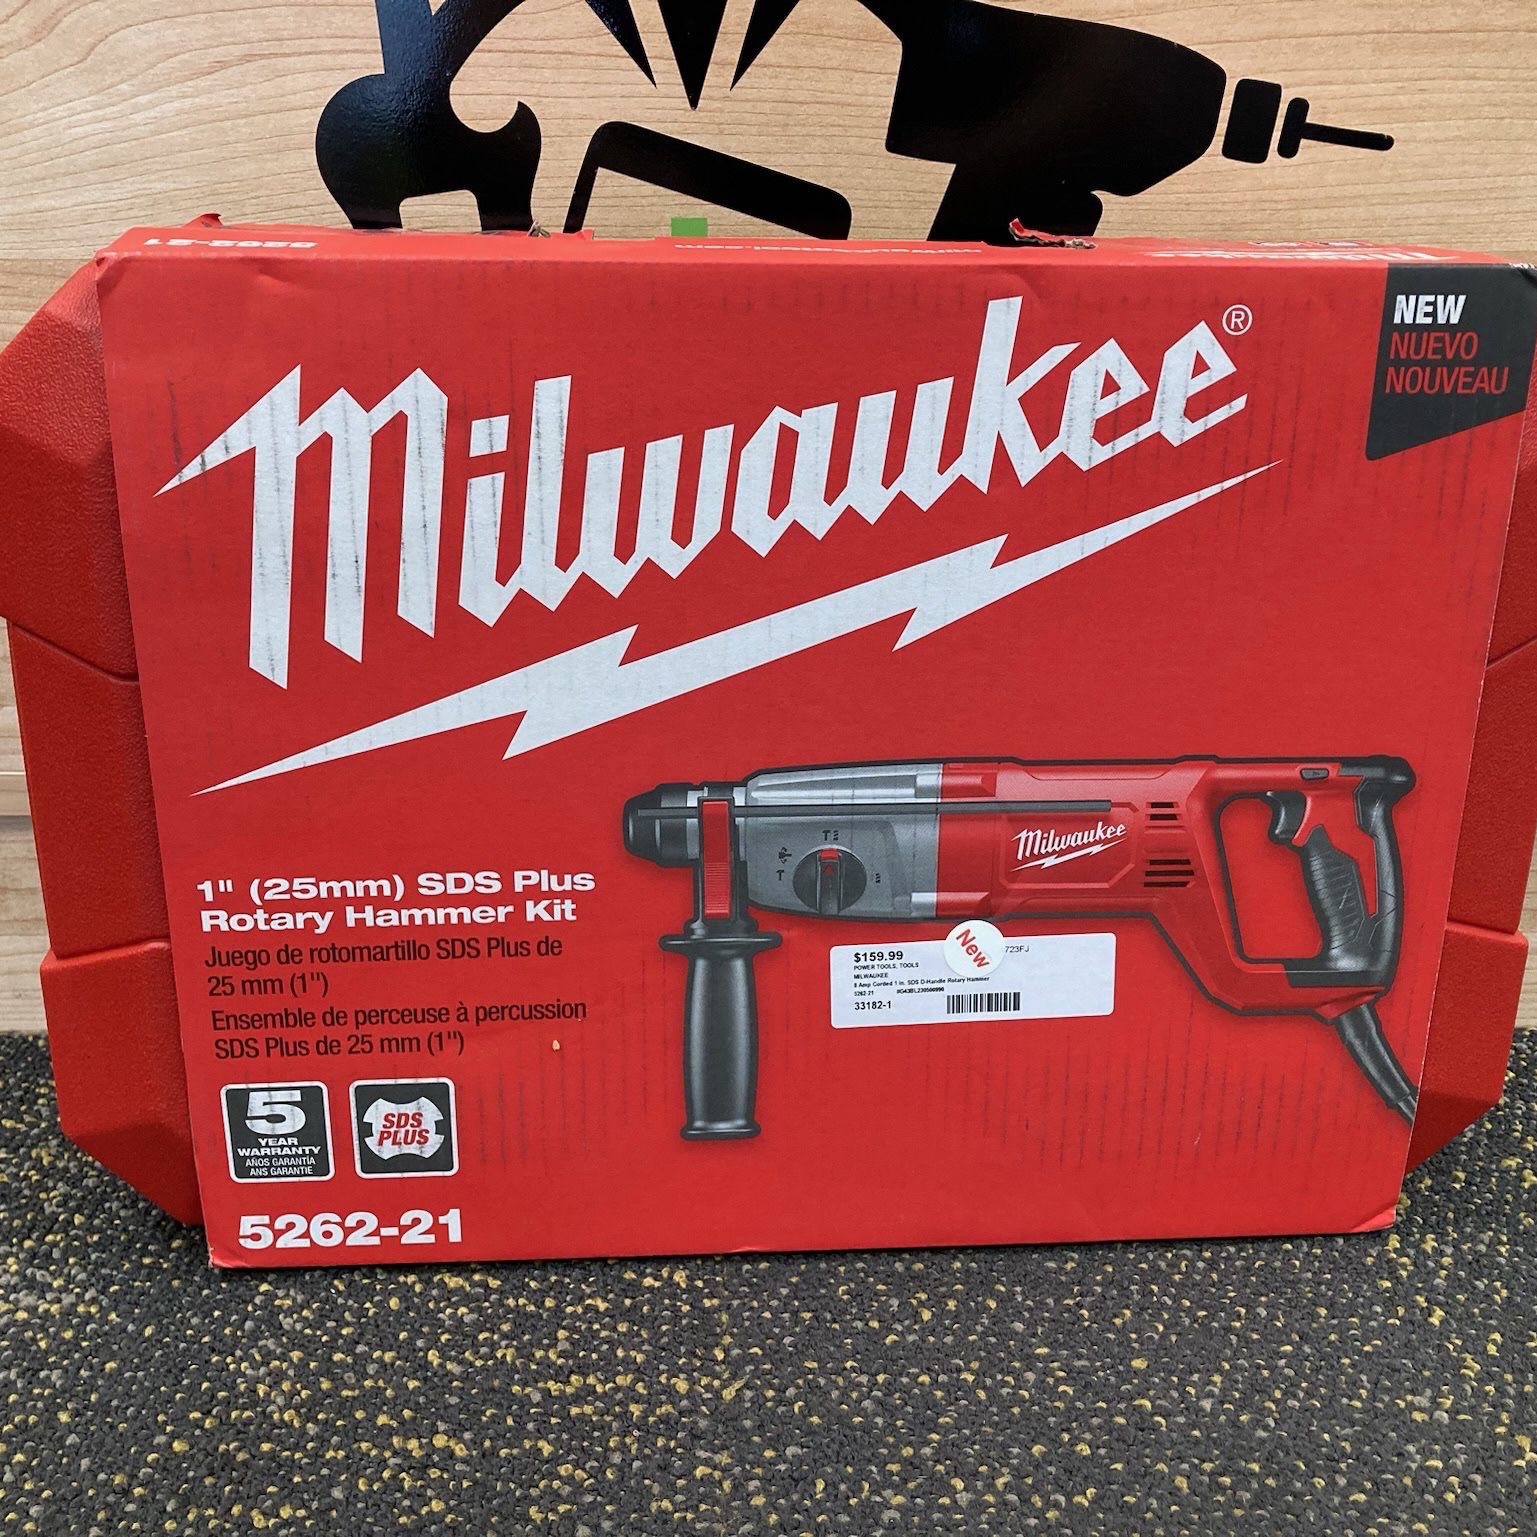 MILWAUKEE 5262-21 Amp Corded 1” SDS D-Handle Rotary Hammer for Sale in  Lynn, MA OfferUp